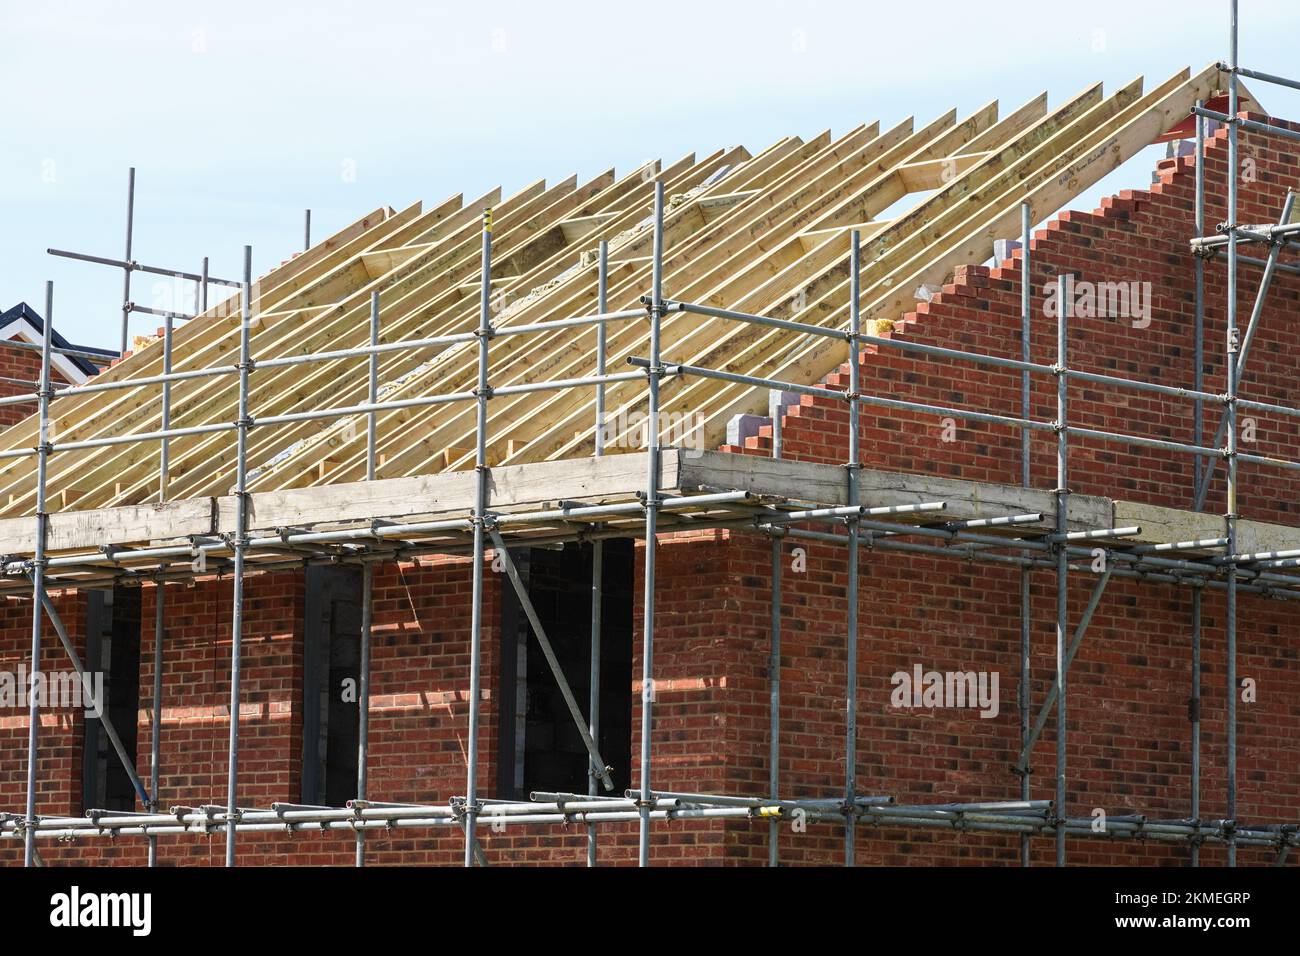 New roof construction at housebuilding site, timber structure of a new build house, London England United Kingdom UK Stock Photo